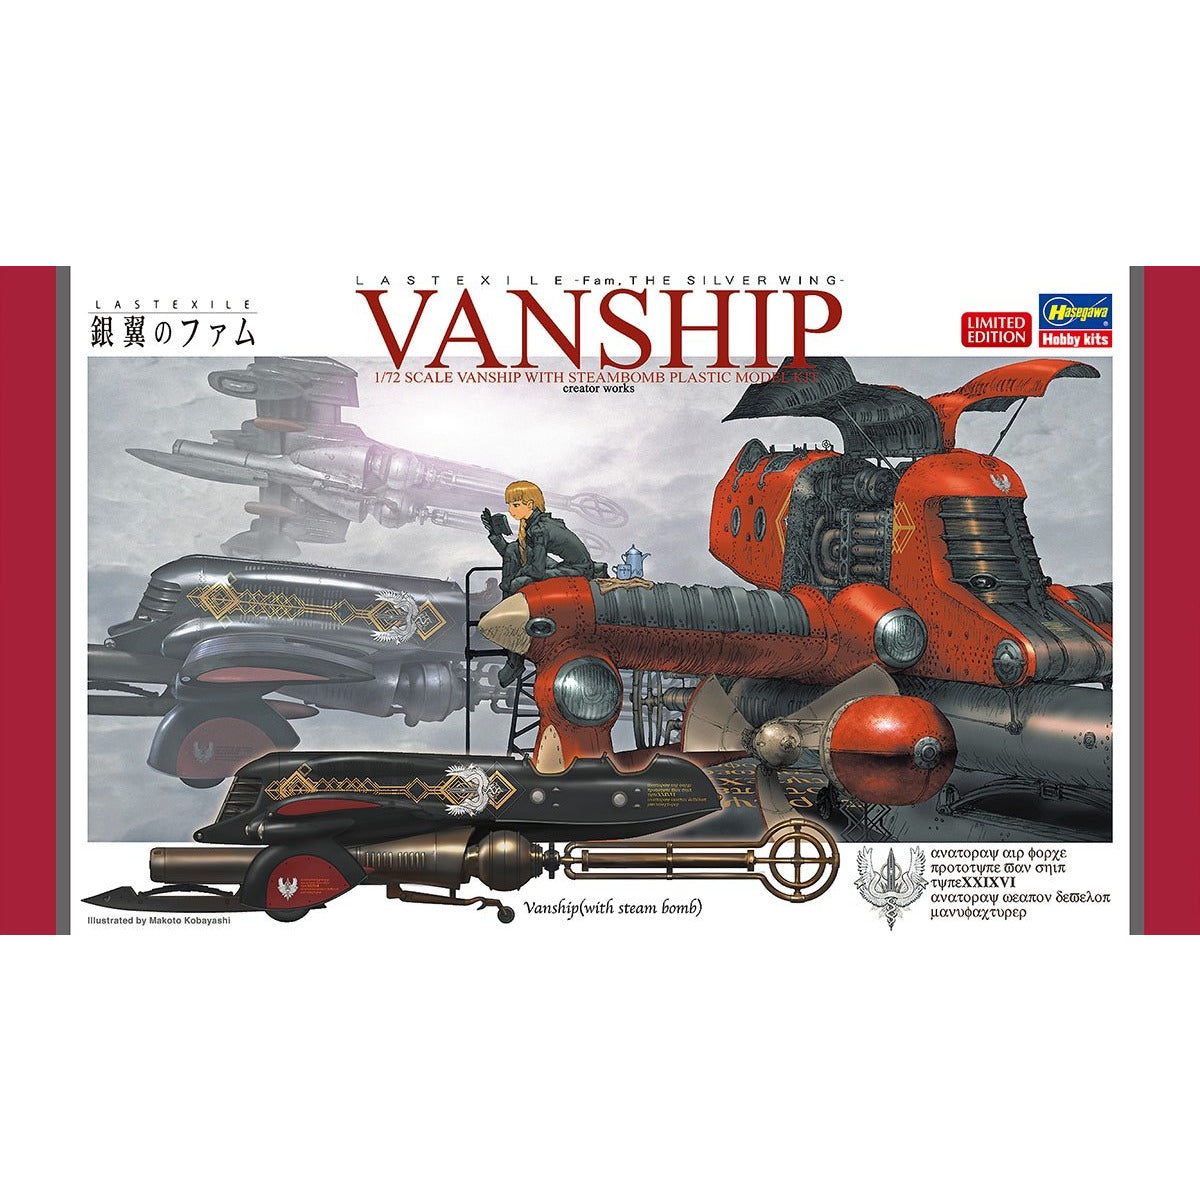 Vanship with High Compression Steam Bomb 1/72 Last Exile Model Kit #64778 by Hasegawa